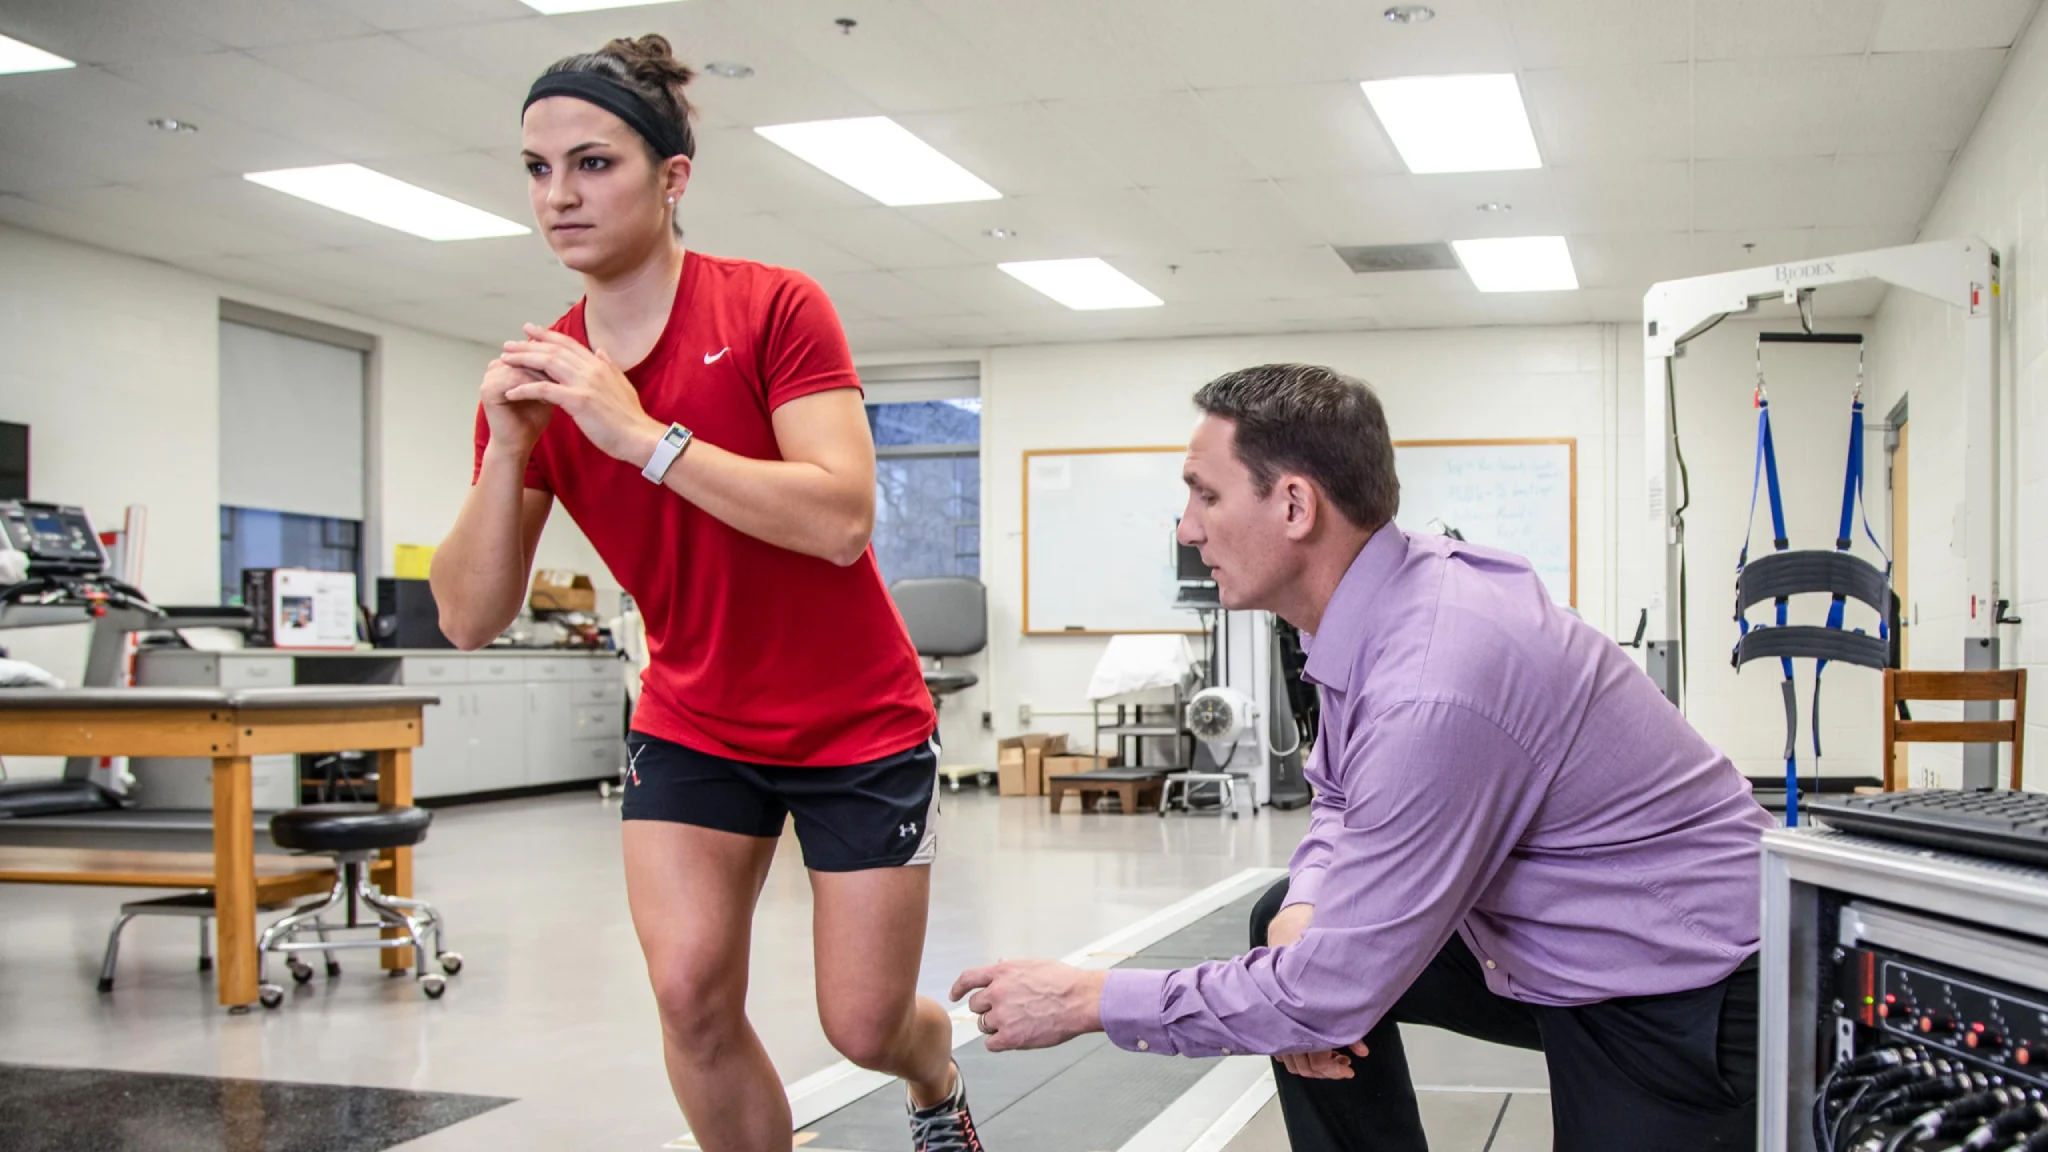 Professor helps student with physical therapy exercise.